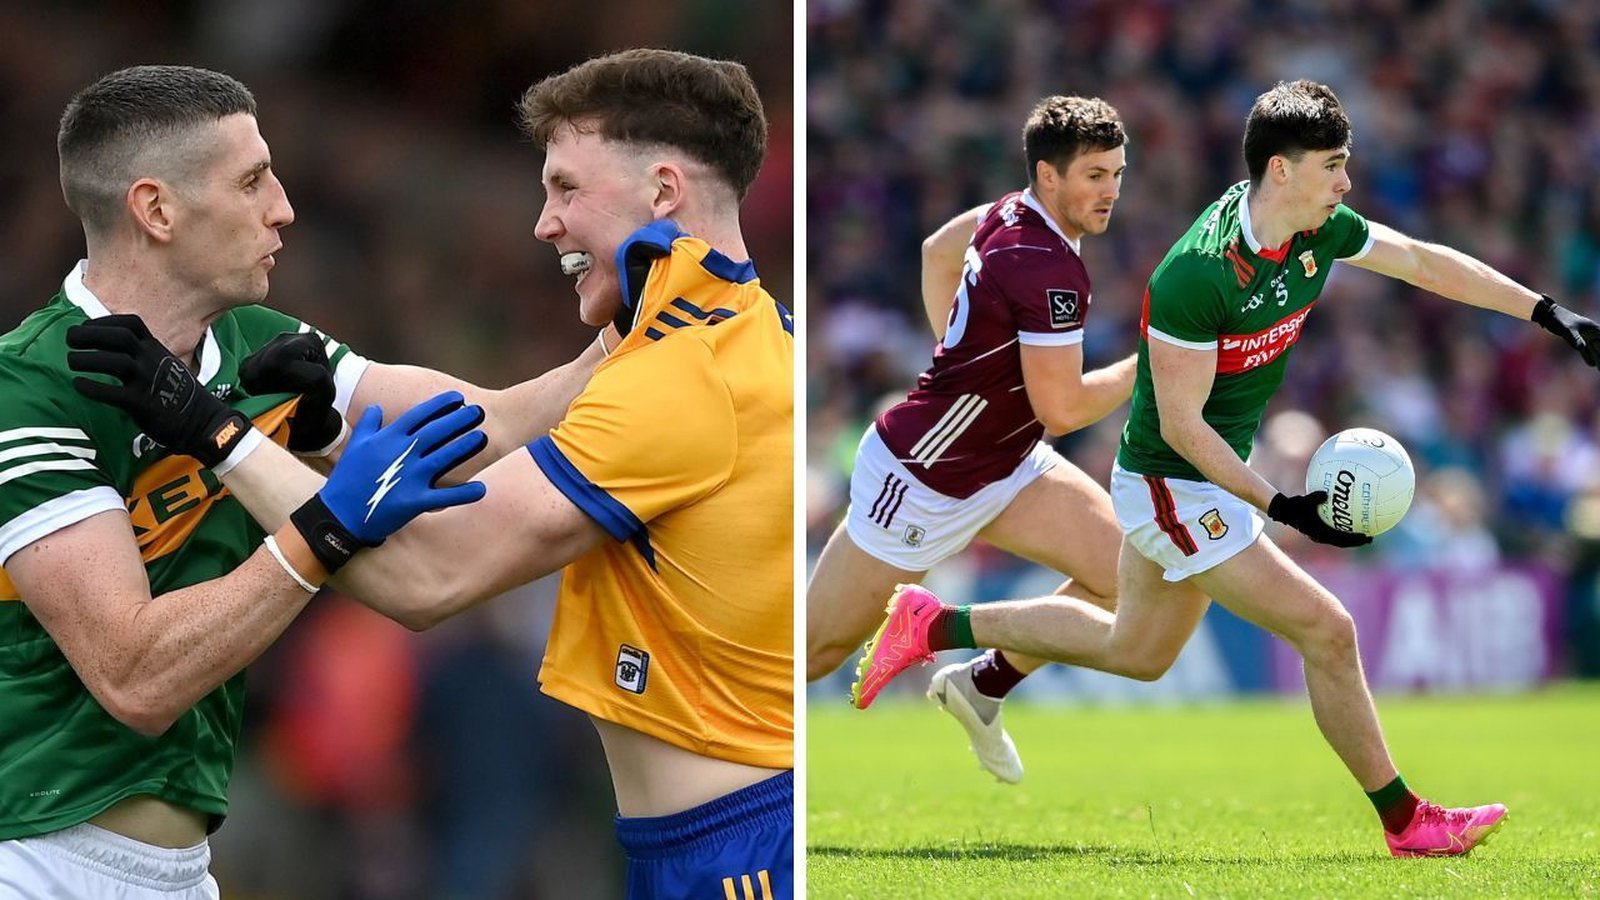 Colm Collins' football championship preview